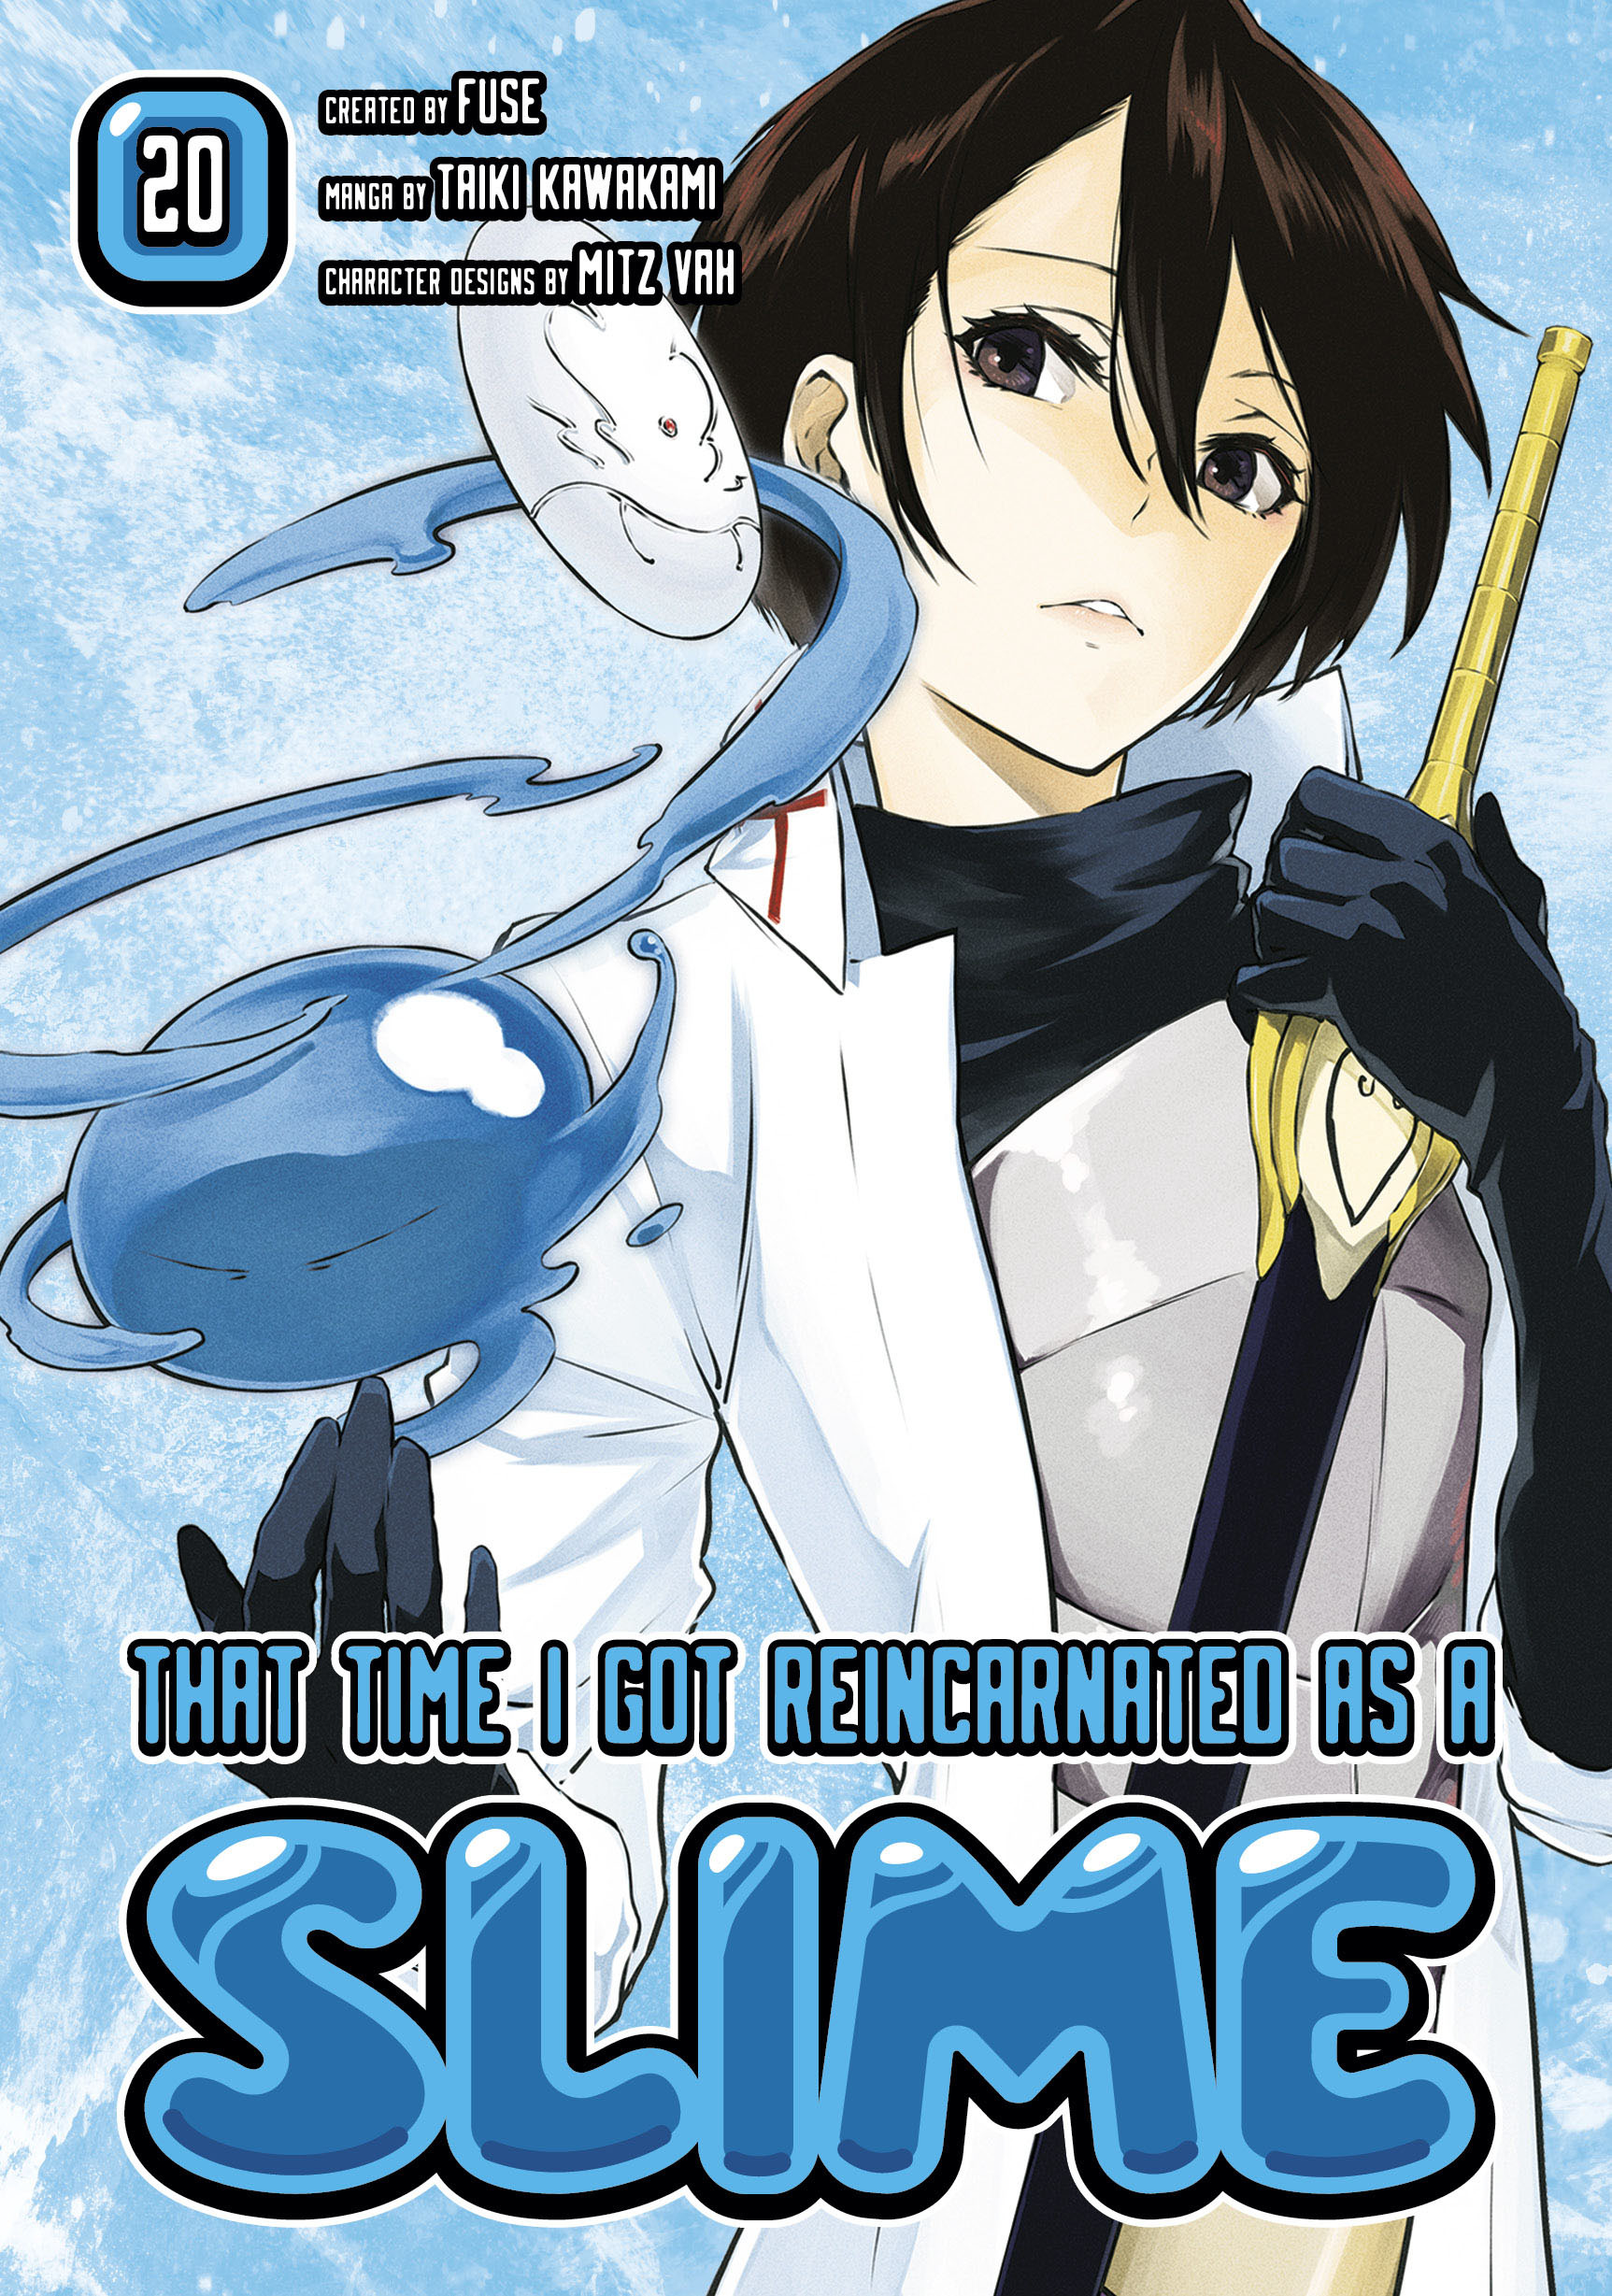 Tensei shitara Slime Datta Ken notebook: Japanese Anime & Manga Notebook,  Anime Journal, (120 lined pages with Size 6x9 inches) Anime Fans